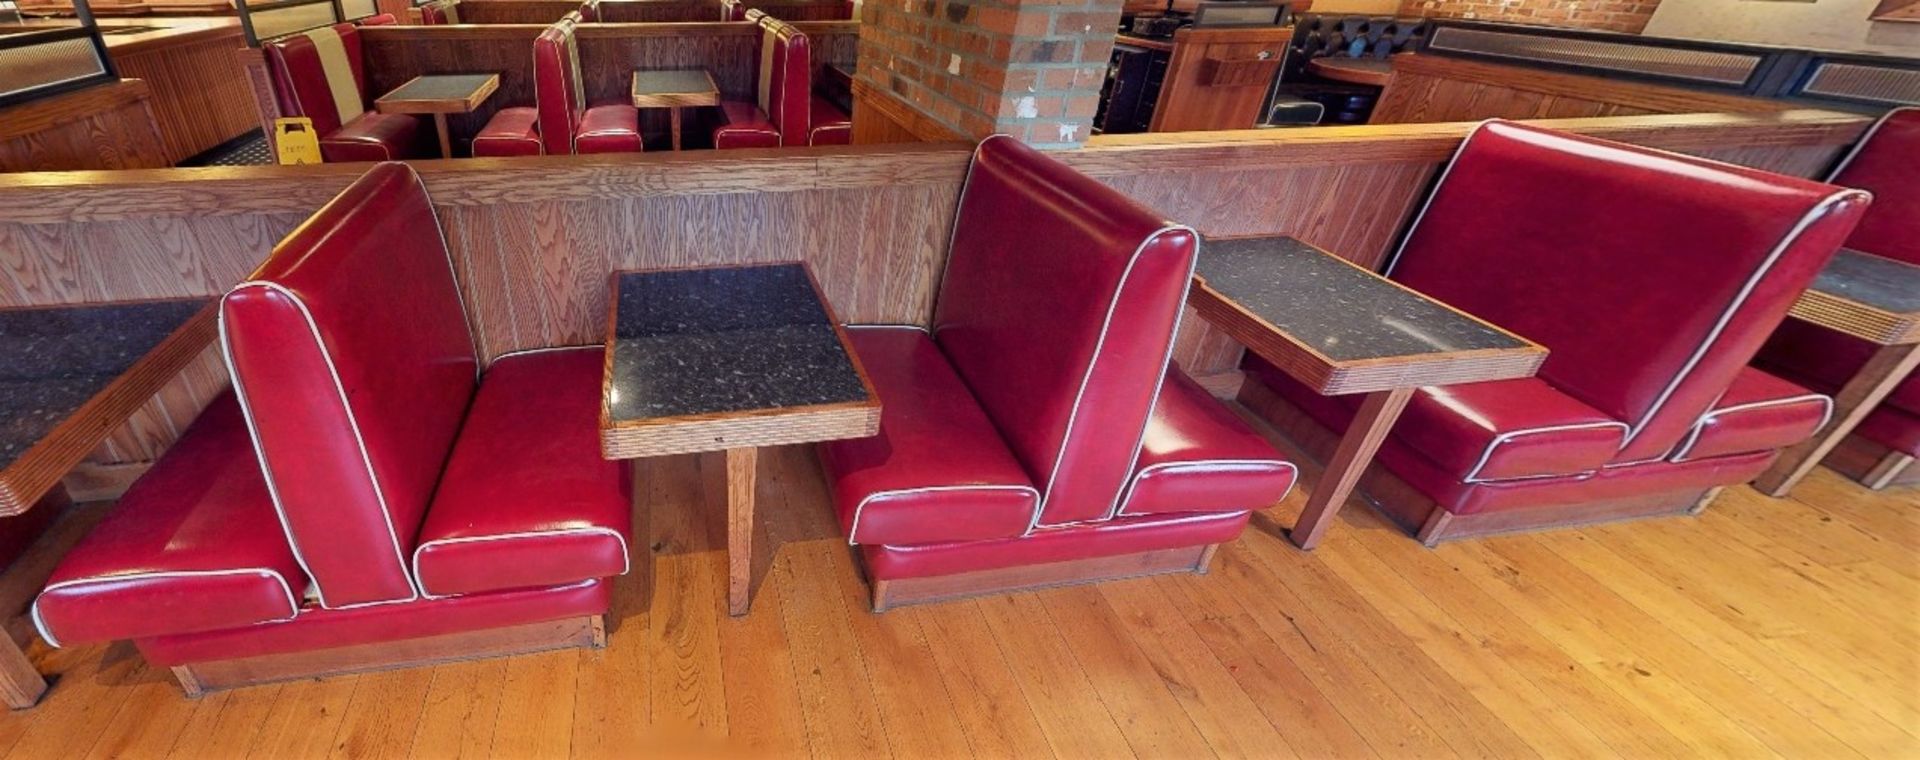 Selection of Single Seating Benches and Dining Tables to Seat Upto 8 Persons - Retro - 1950's - Image 3 of 9